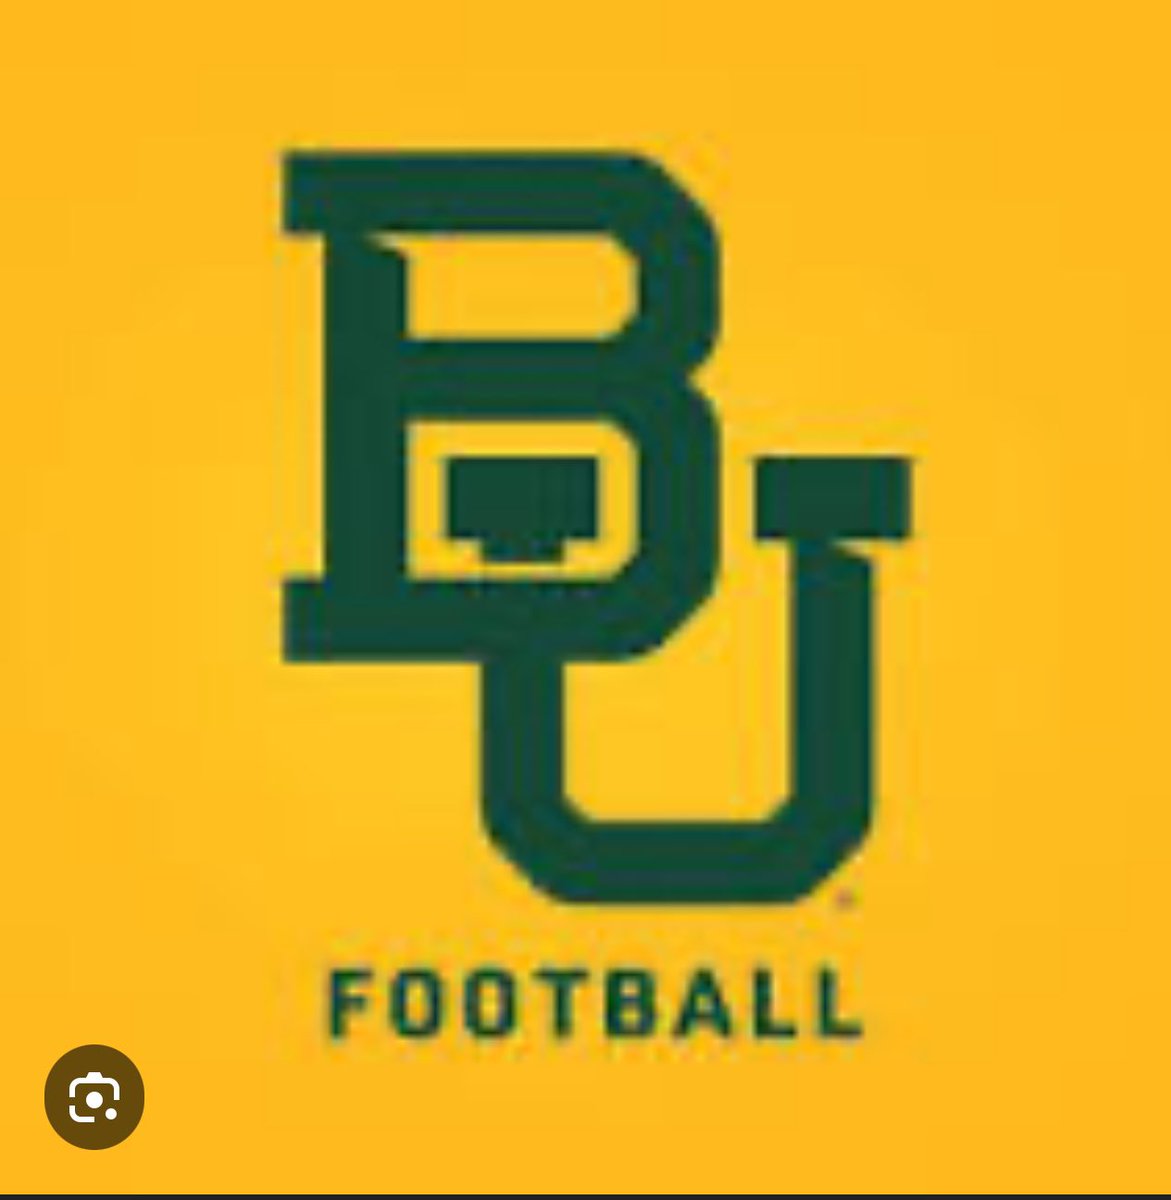 Thanks to @warren_rowan @JuJuSports1 for taking us to @BUFootball on yesterday. Had a great time visiting! @CoachMiller_ @Cwatts64 @aclavo_BU @CoachDaveAranda